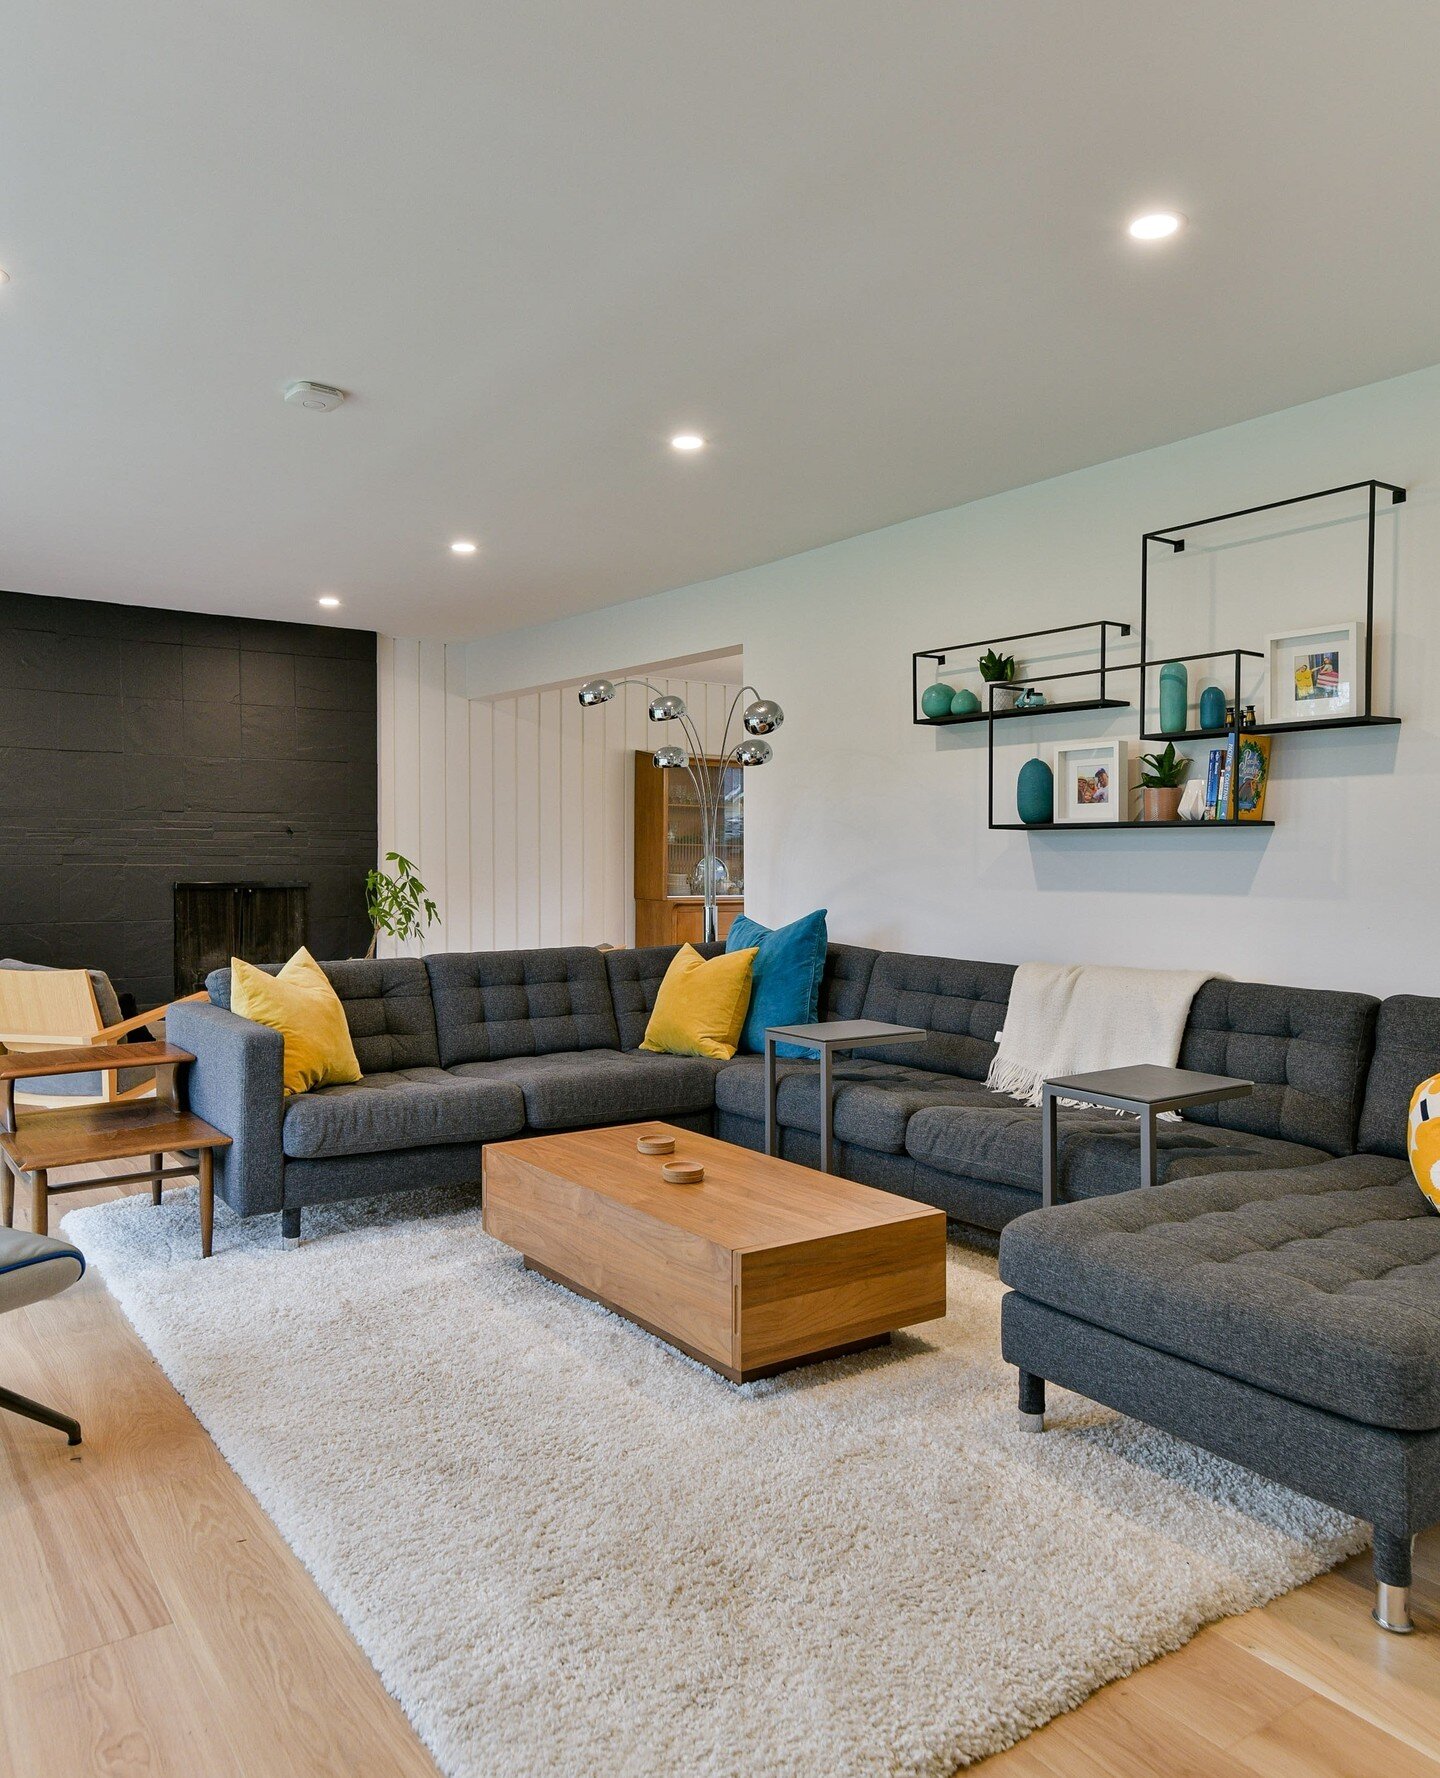 This spacious living room is nothing short of a hosting dream &ndash; there's room for all and then some! 😃 ⁠
⁠
Don't have the space you need to do what you love? That's where we come in! Get in touch with our team via the link in our bio and click 